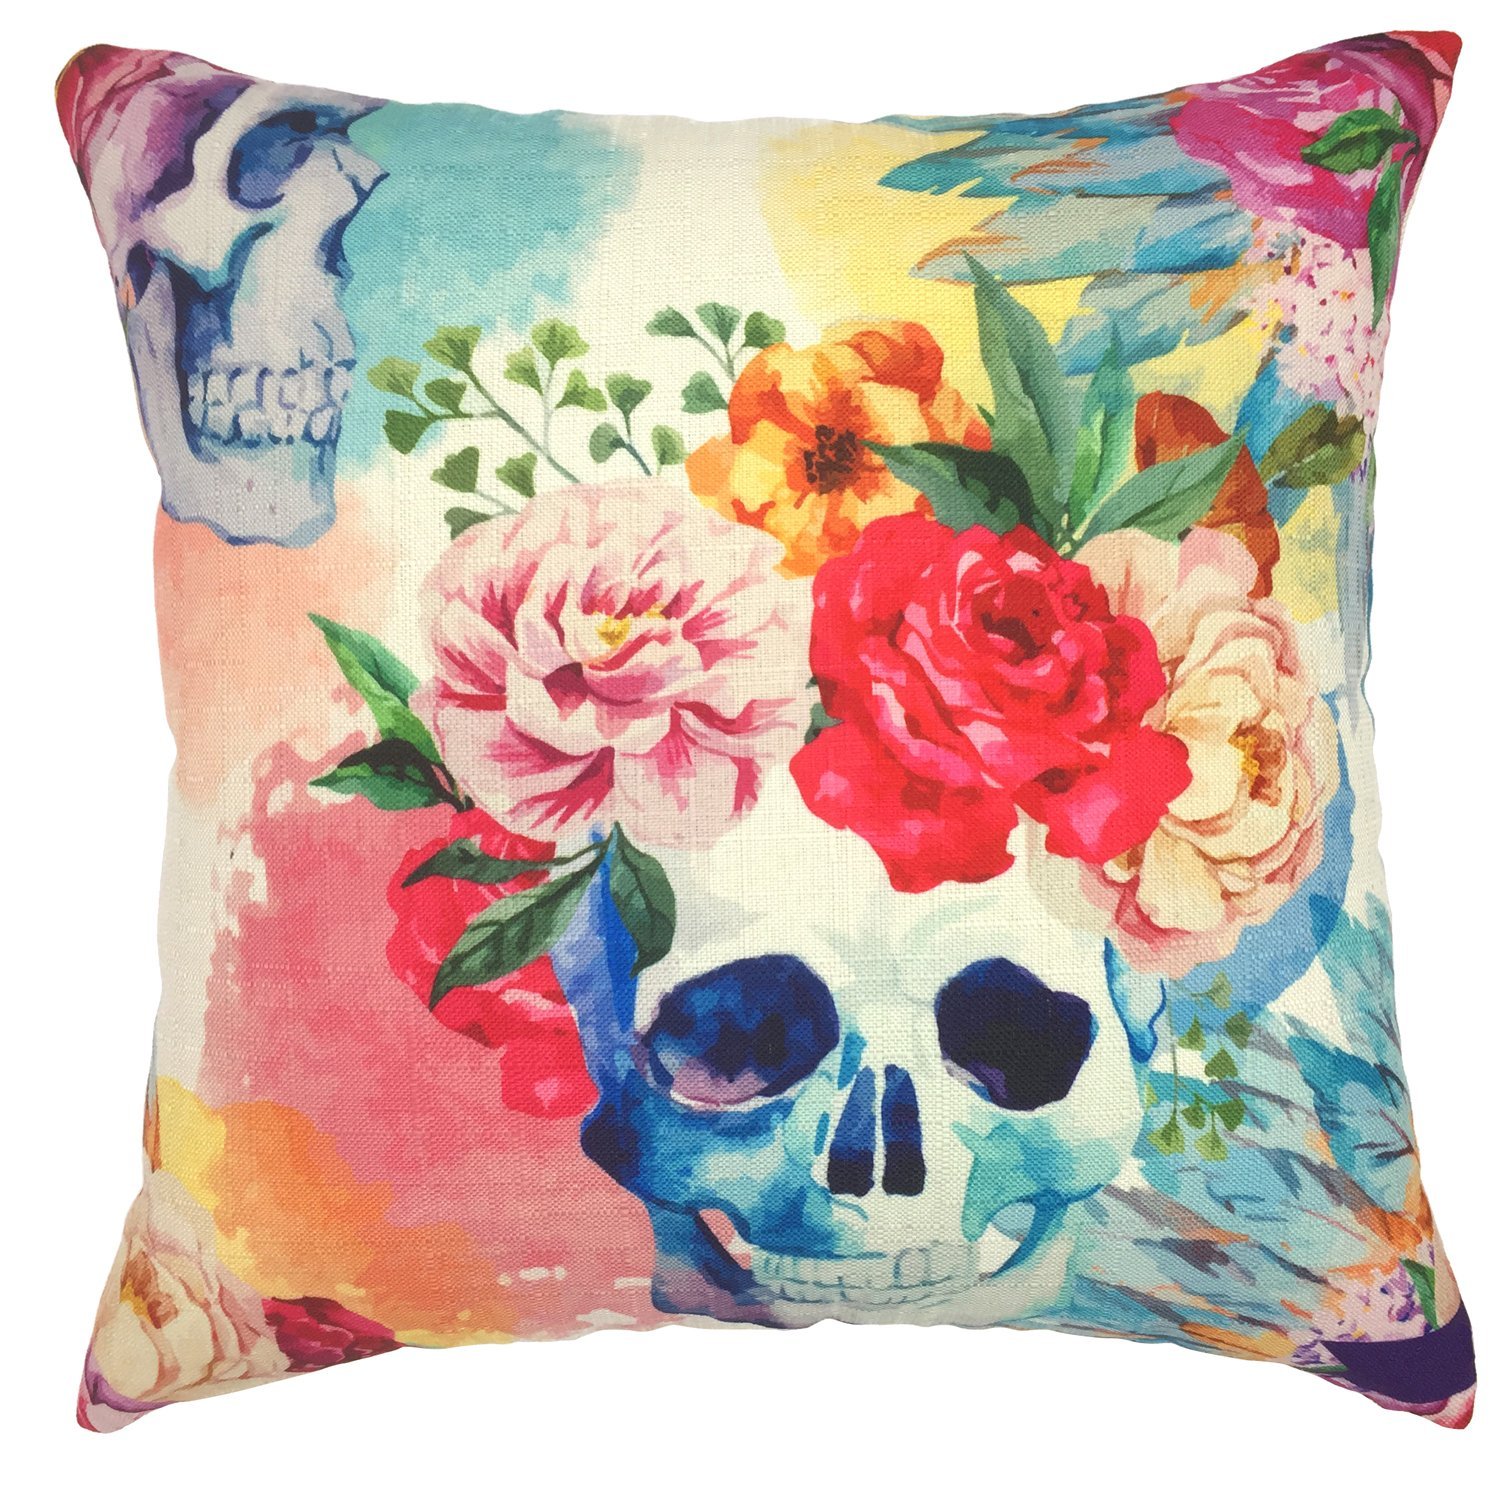 YOUR SMILE Cotton Linen Decorative Cushion Covers Vintage Skull Throw Pillow Cases for Sofa 1818 Inches (Flower Skull NEW)